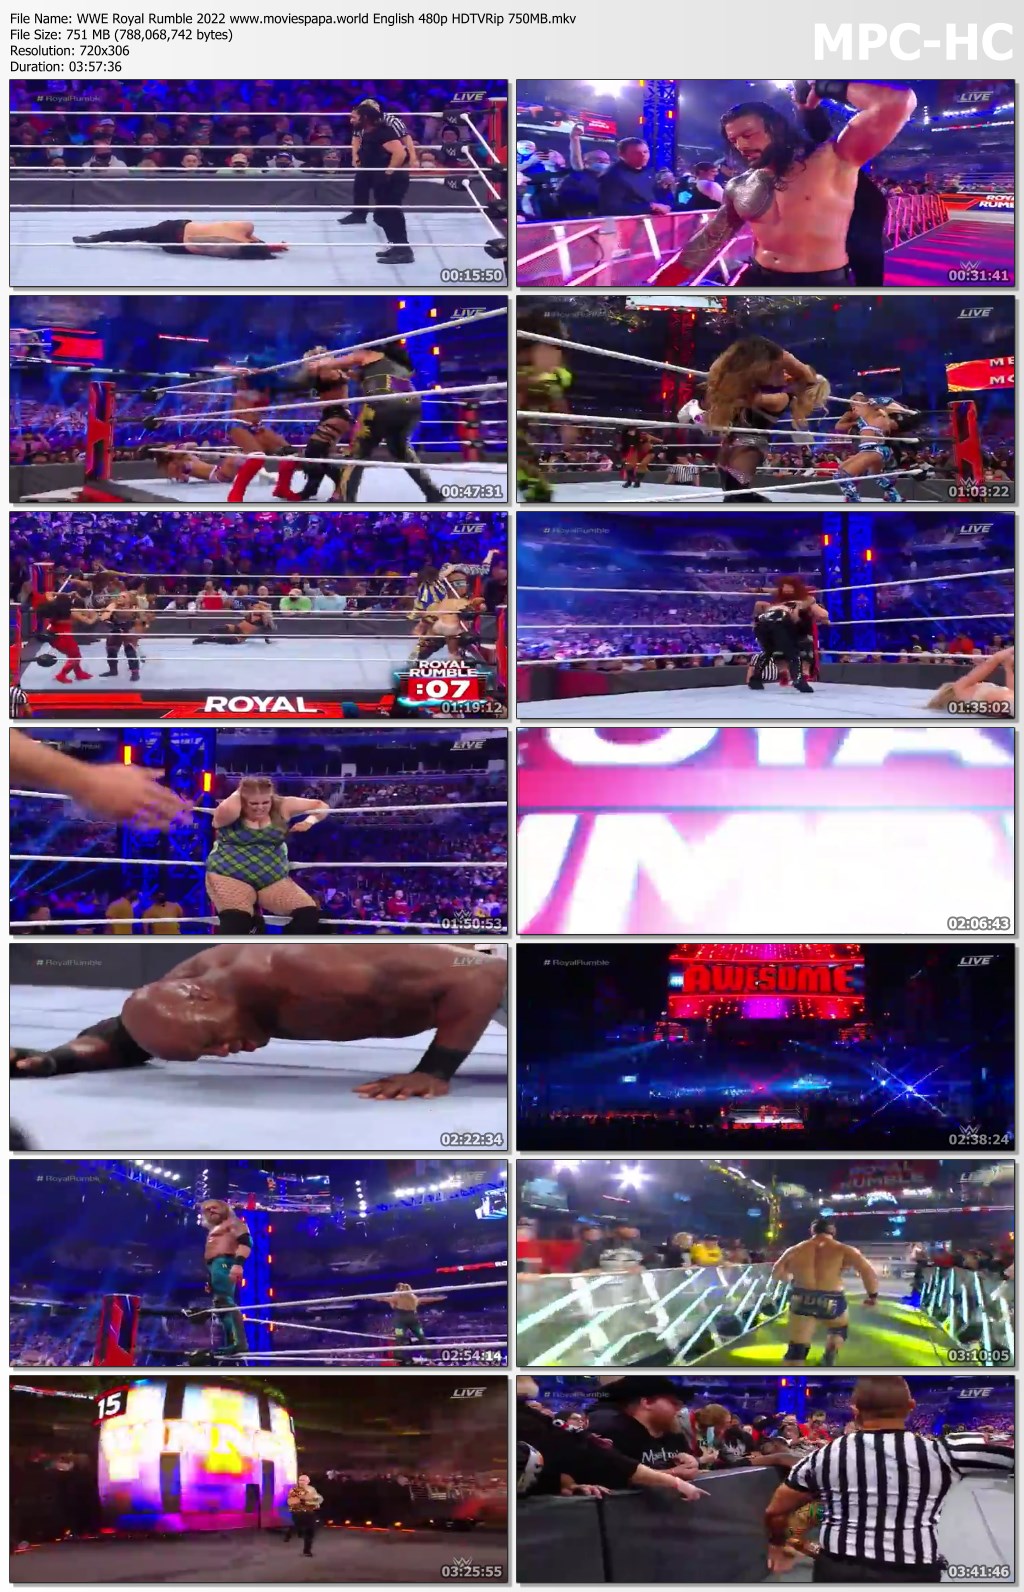 wwe the greatest royal rumble torrent download